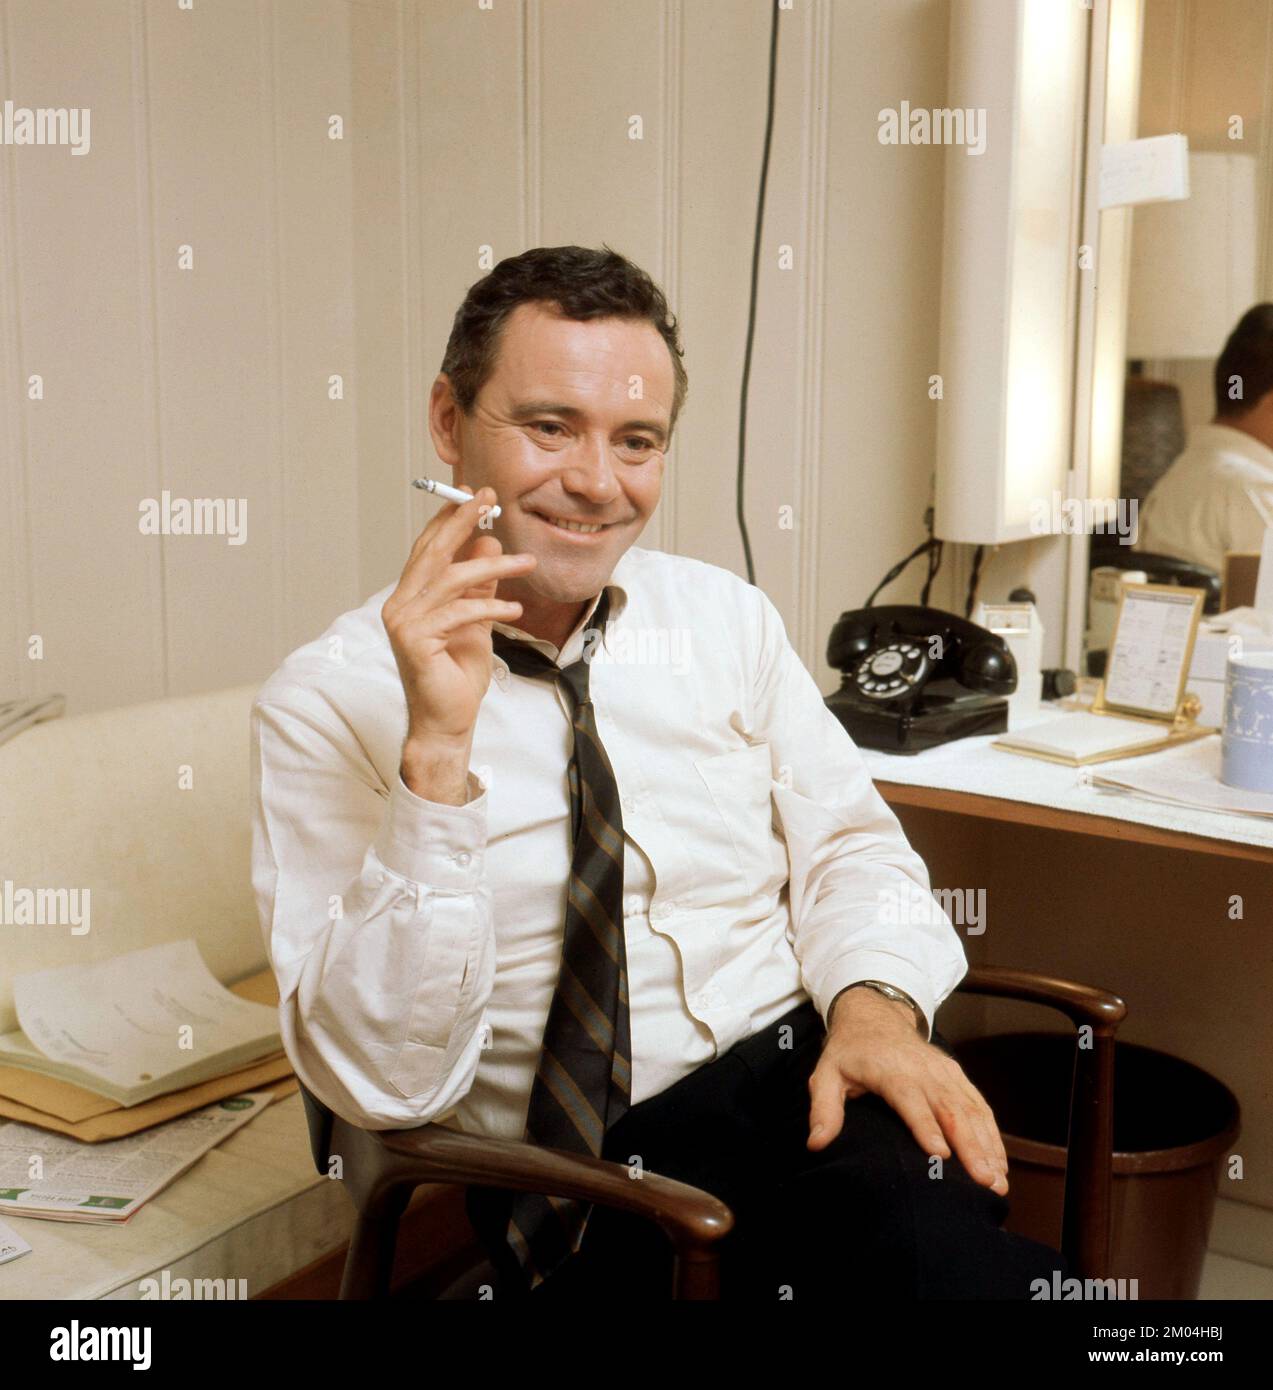 Jack Lemmon. American actor, 1925-2001. Pictured during an American television appearance 1963. Roland Palm ref 5:36:10 Stock Photo